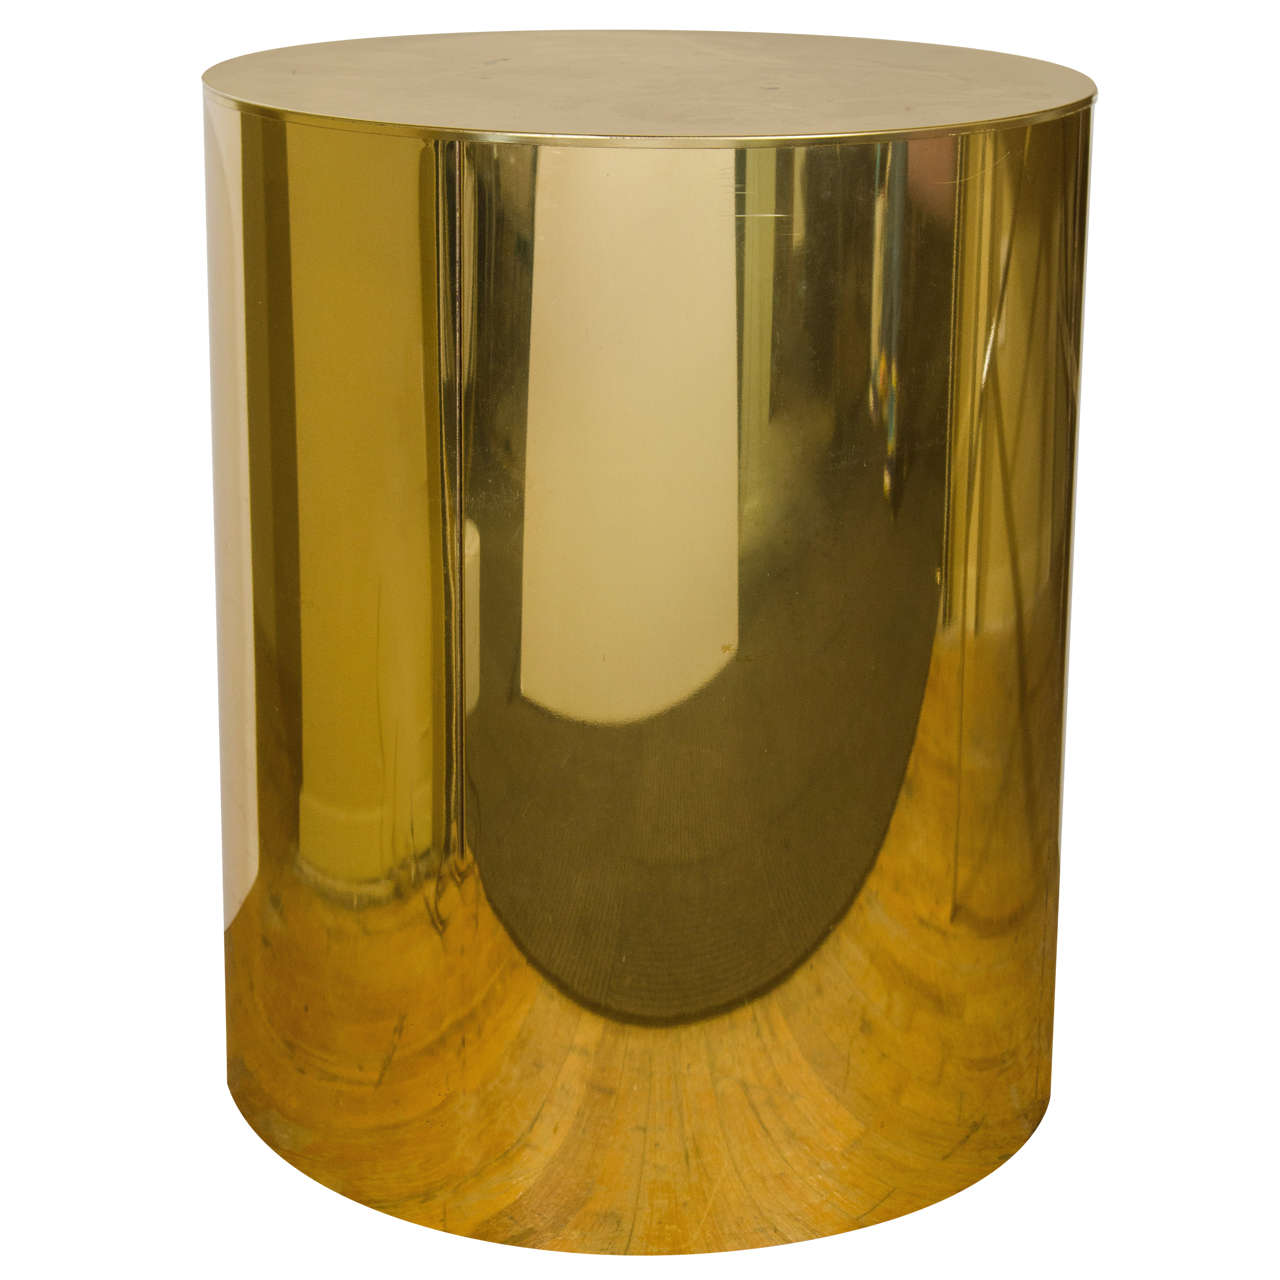 Midcentury Signed Curtis Jere Brass Drum Table